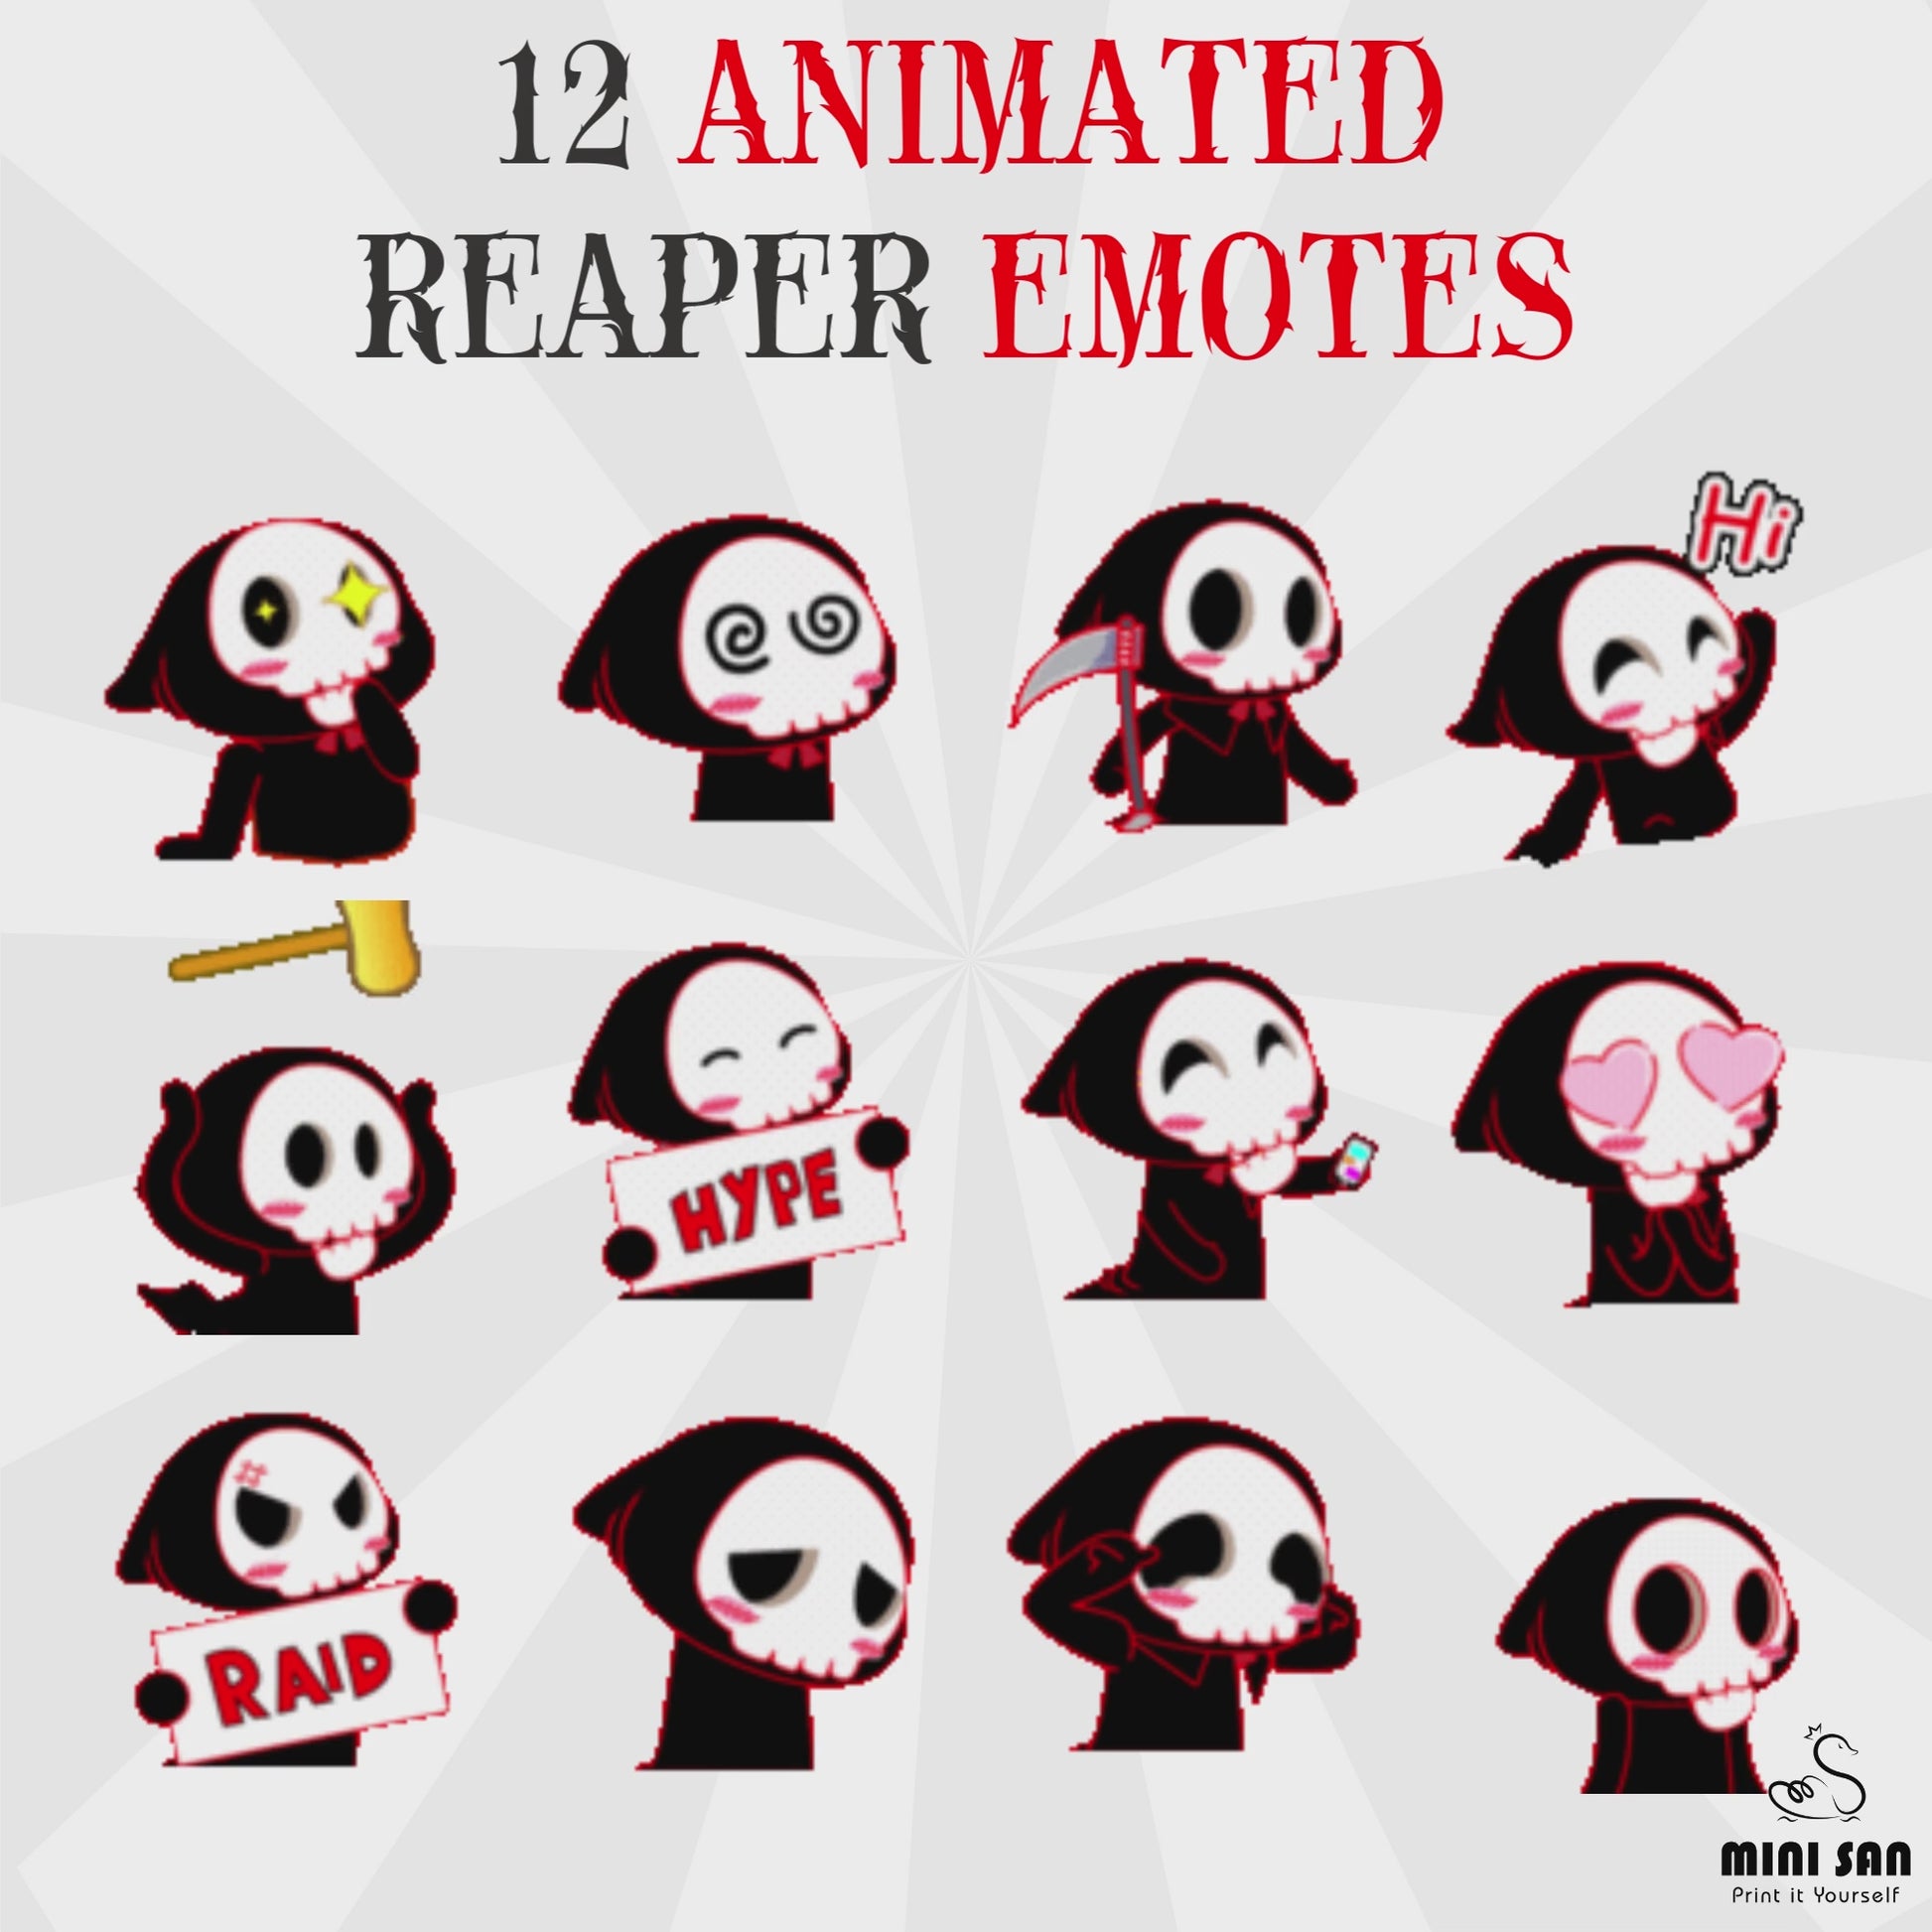 12 Animated Funny Reaper Emotes for Twitch, Discord